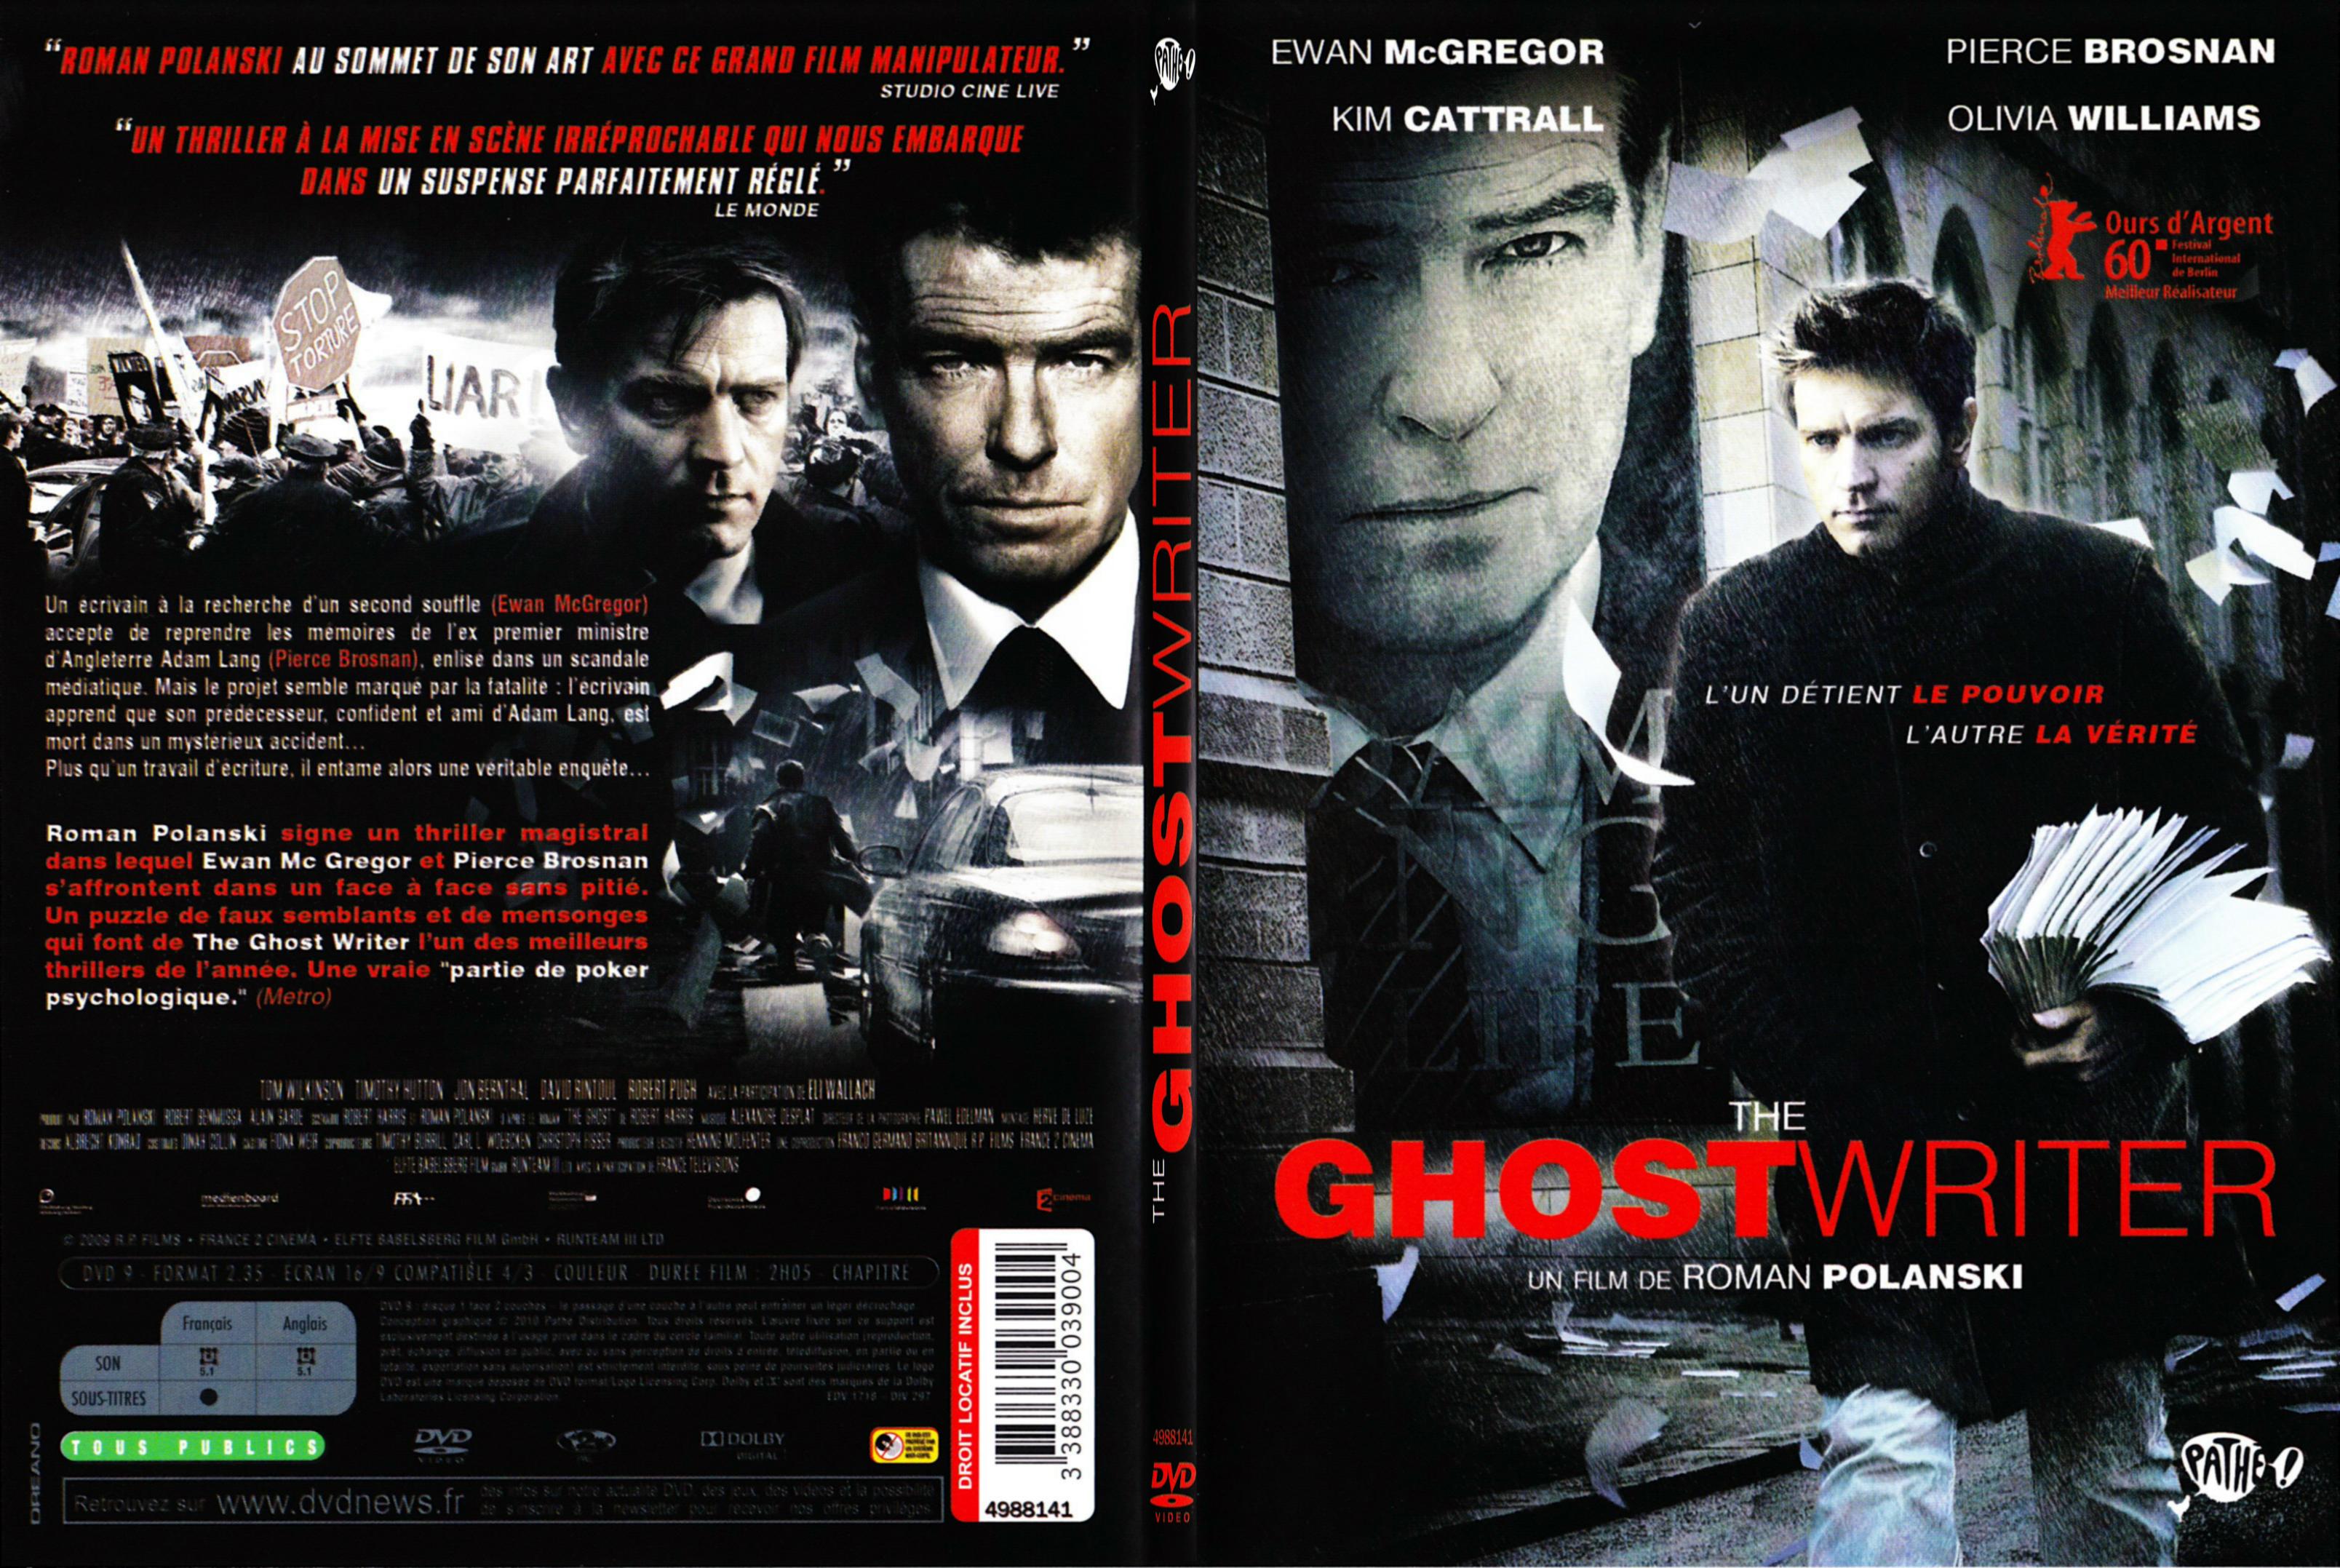 Jaquette DVD The ghost writer - SLIM